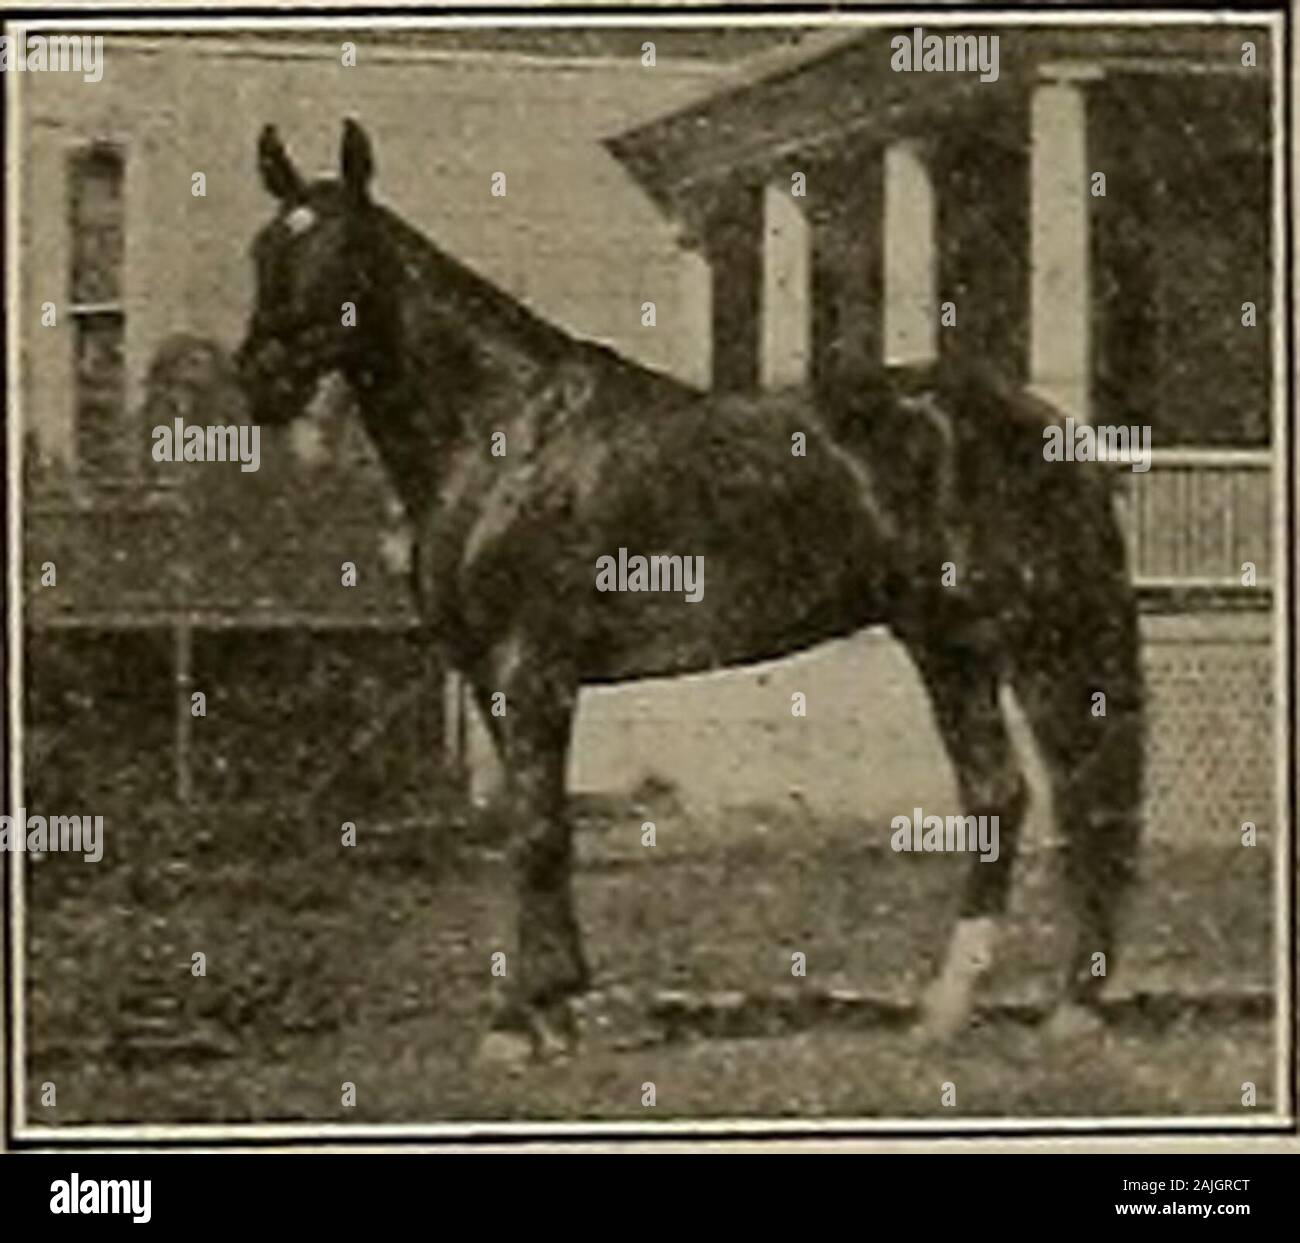 Breeder and sportsman . to or address E. D. DIGGES, Owner, Pleasanton, Cal. A Gam* RaceHorse In the Stud Bay stallion; stands 15.3 hands; weighs 1150. Siredby Athadon (1) 2:27 (sire of The Donna 2:07%,Athasham 2:09%, Donasham 2:09%, Sue 2:12, Lis-terine 2:13^, Mattawan (3) 2:17%, and S othersin 2:30); dam the great broodmare Cora Wick-ersham (also dam of Nogi (3) 2:17%-, (4) 2:10^,winner of 3-year-old trotting division BreedersFuturity 1907 and Occident and Stanford Stakes ofsame vear, and Donasham 2:09% and Kinneysham(2) 2:18%), by Junio 2:22% (sire of dams of Geo. G.2:05^, etc.). Athasham ha Stock Photo